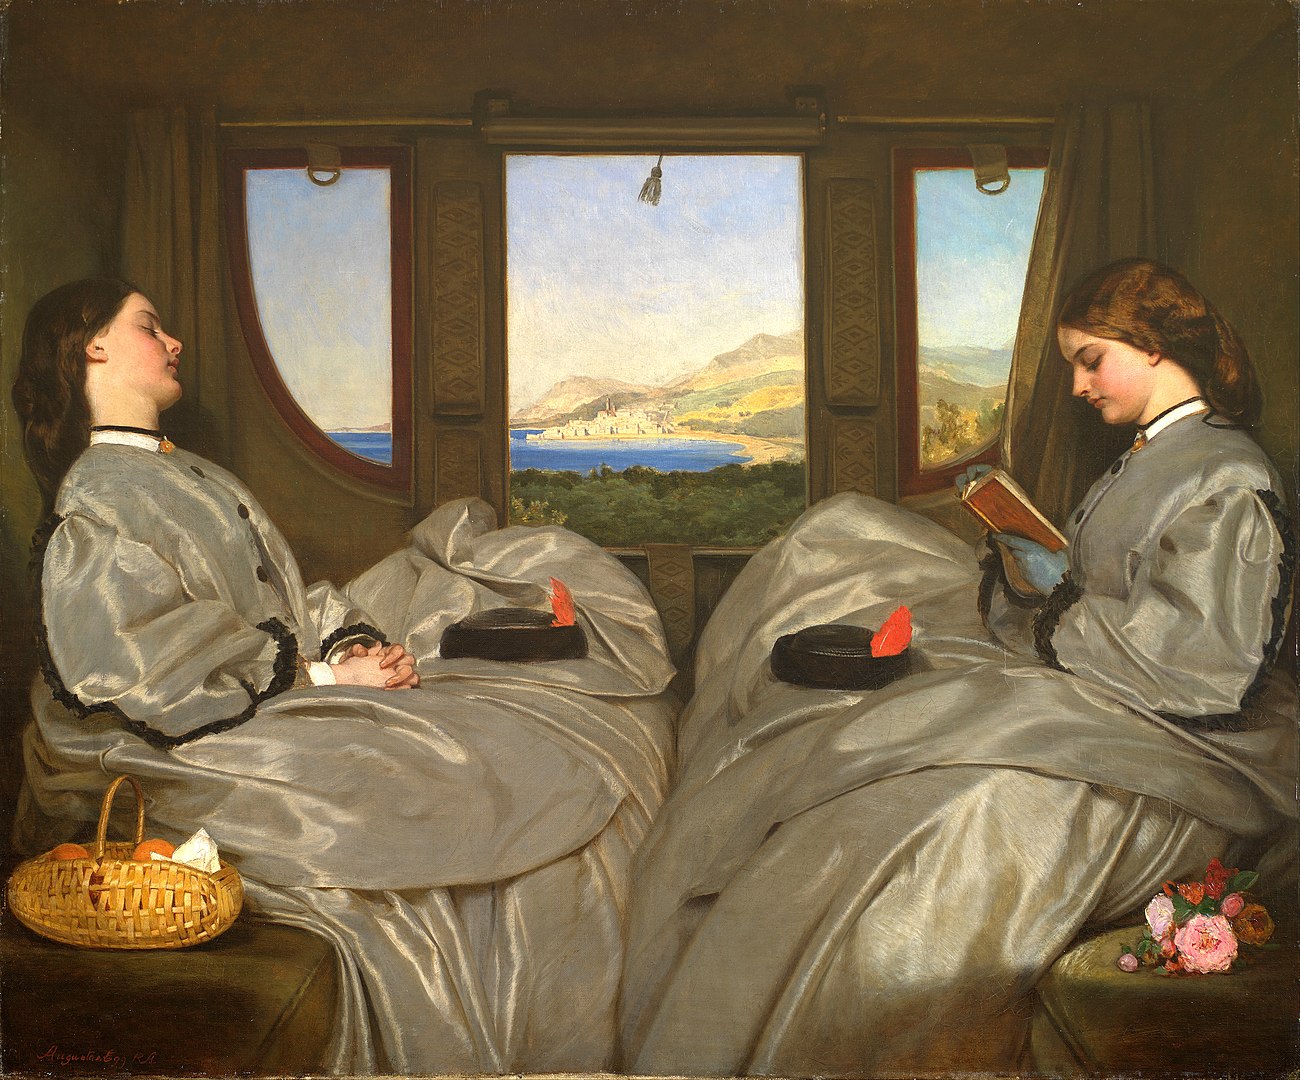 Two girls in dresses sitting across from each other in facing train seats with a window between them